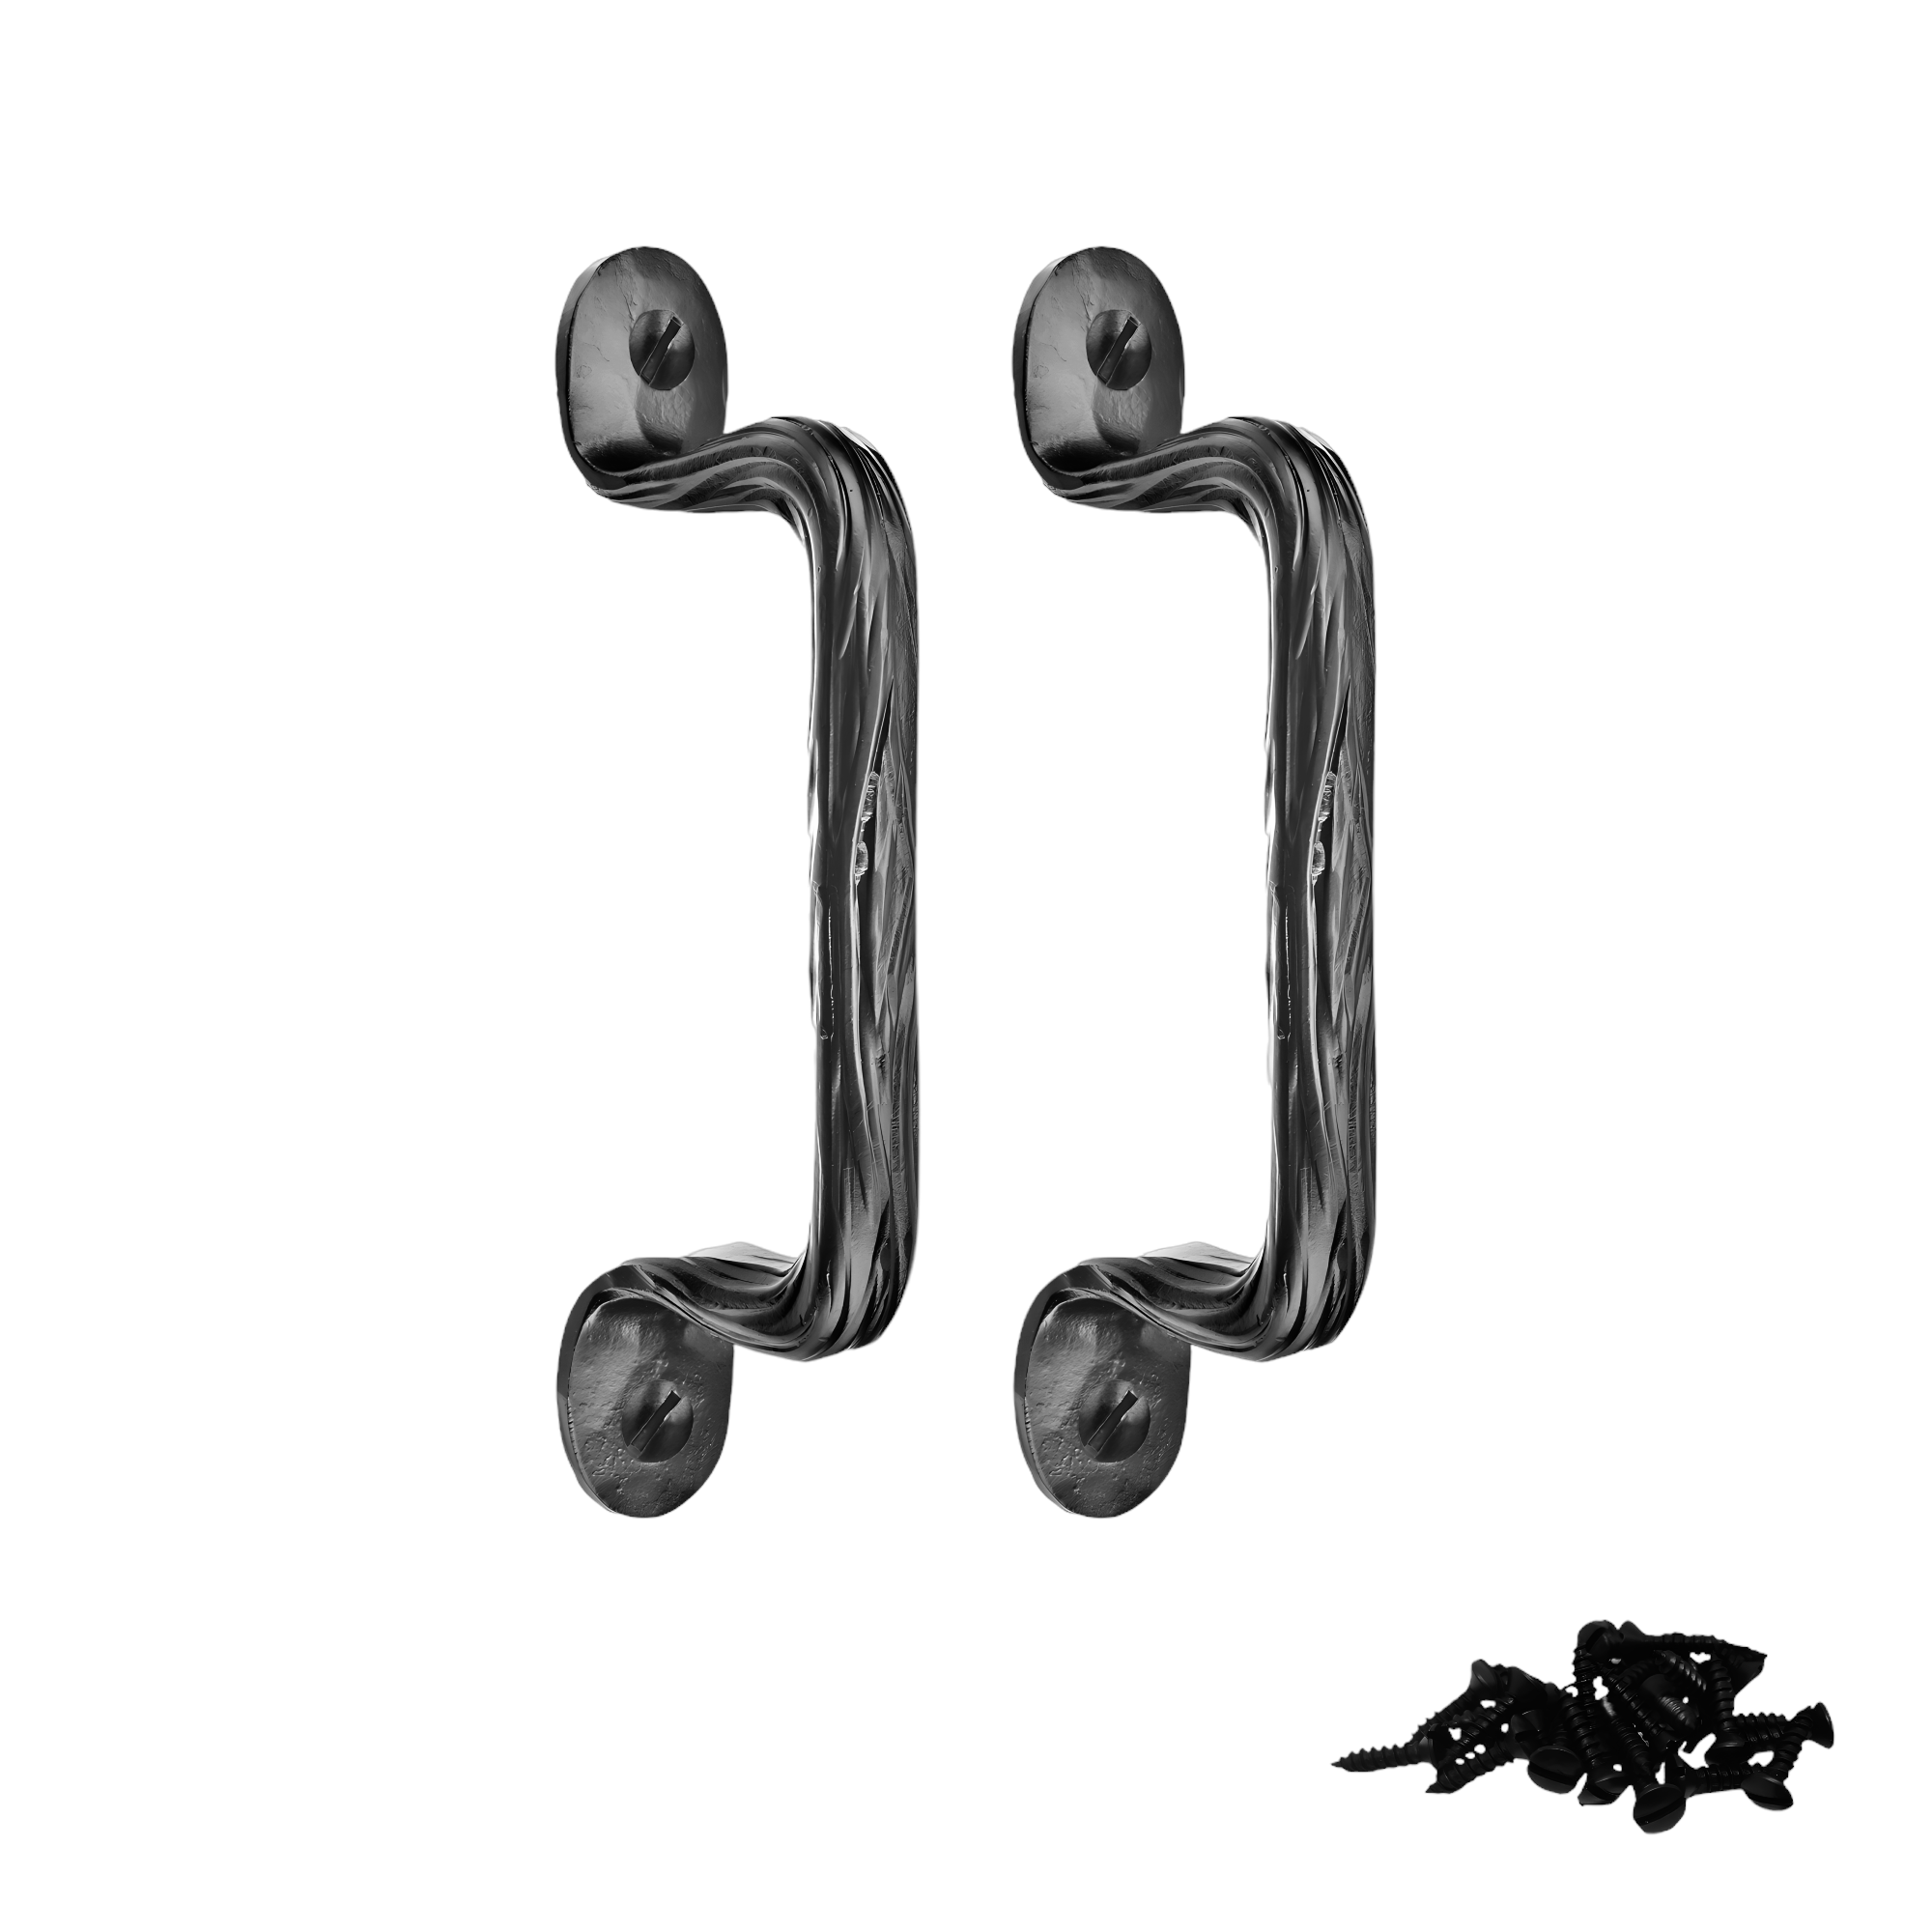 2 Pack Chest Handle 6 inch Rustic Cabinet Door Handles Iron Cabinet Pulls Antique Trunk Hardware Hammered Drawer Pulls Country Dresser Handles The Madera Series by Borderland Rustic Hardware - image 1 of 2